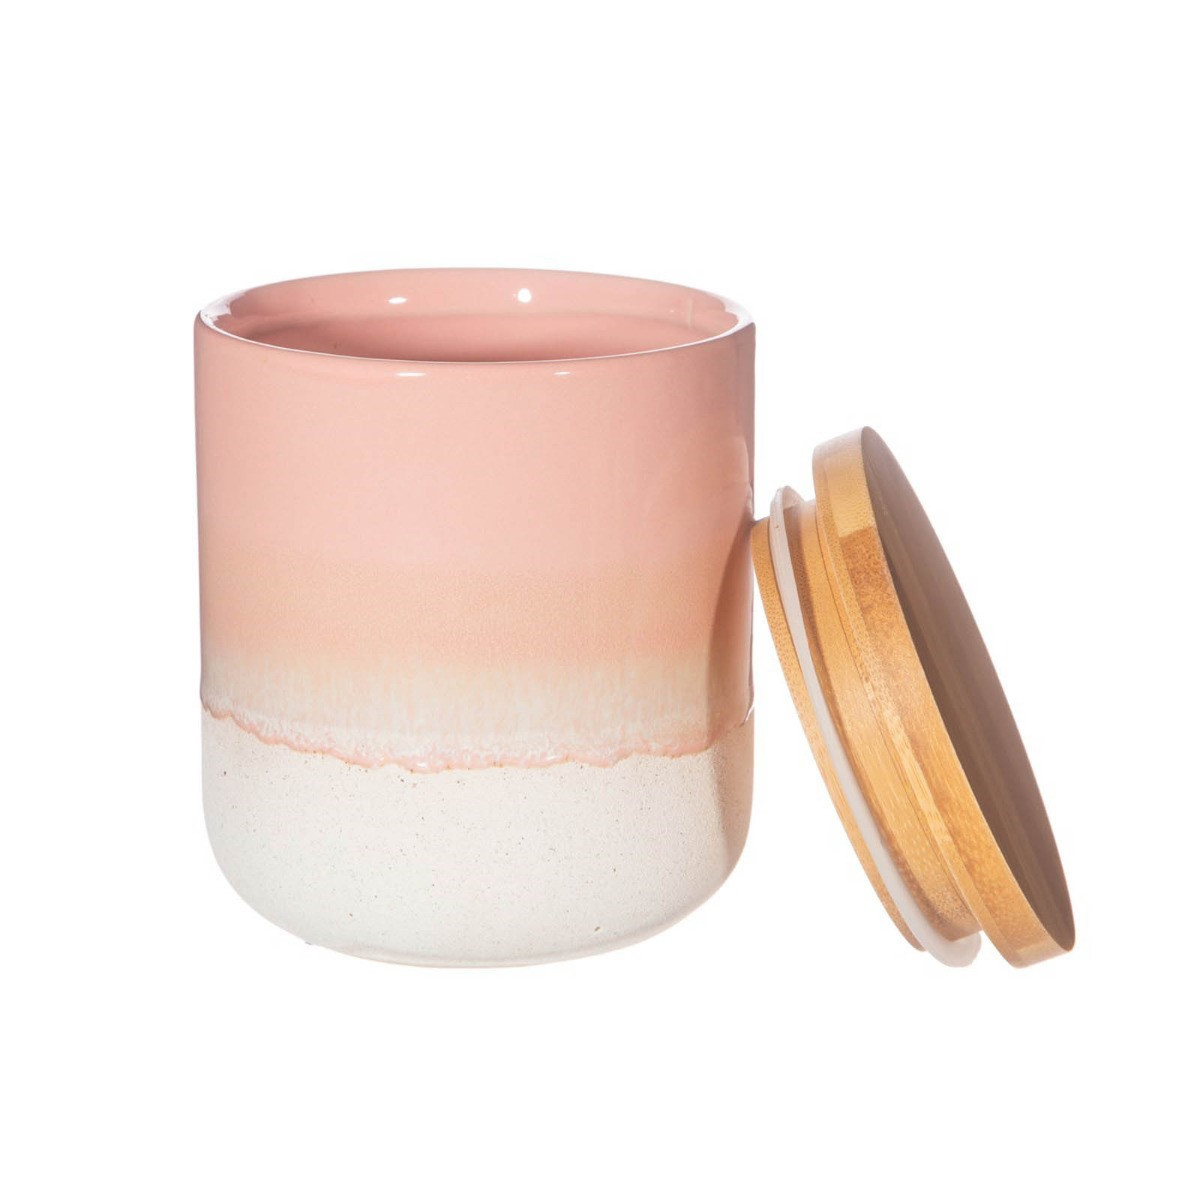 Sass & Belle Mojave Glaze Canister - Pink>